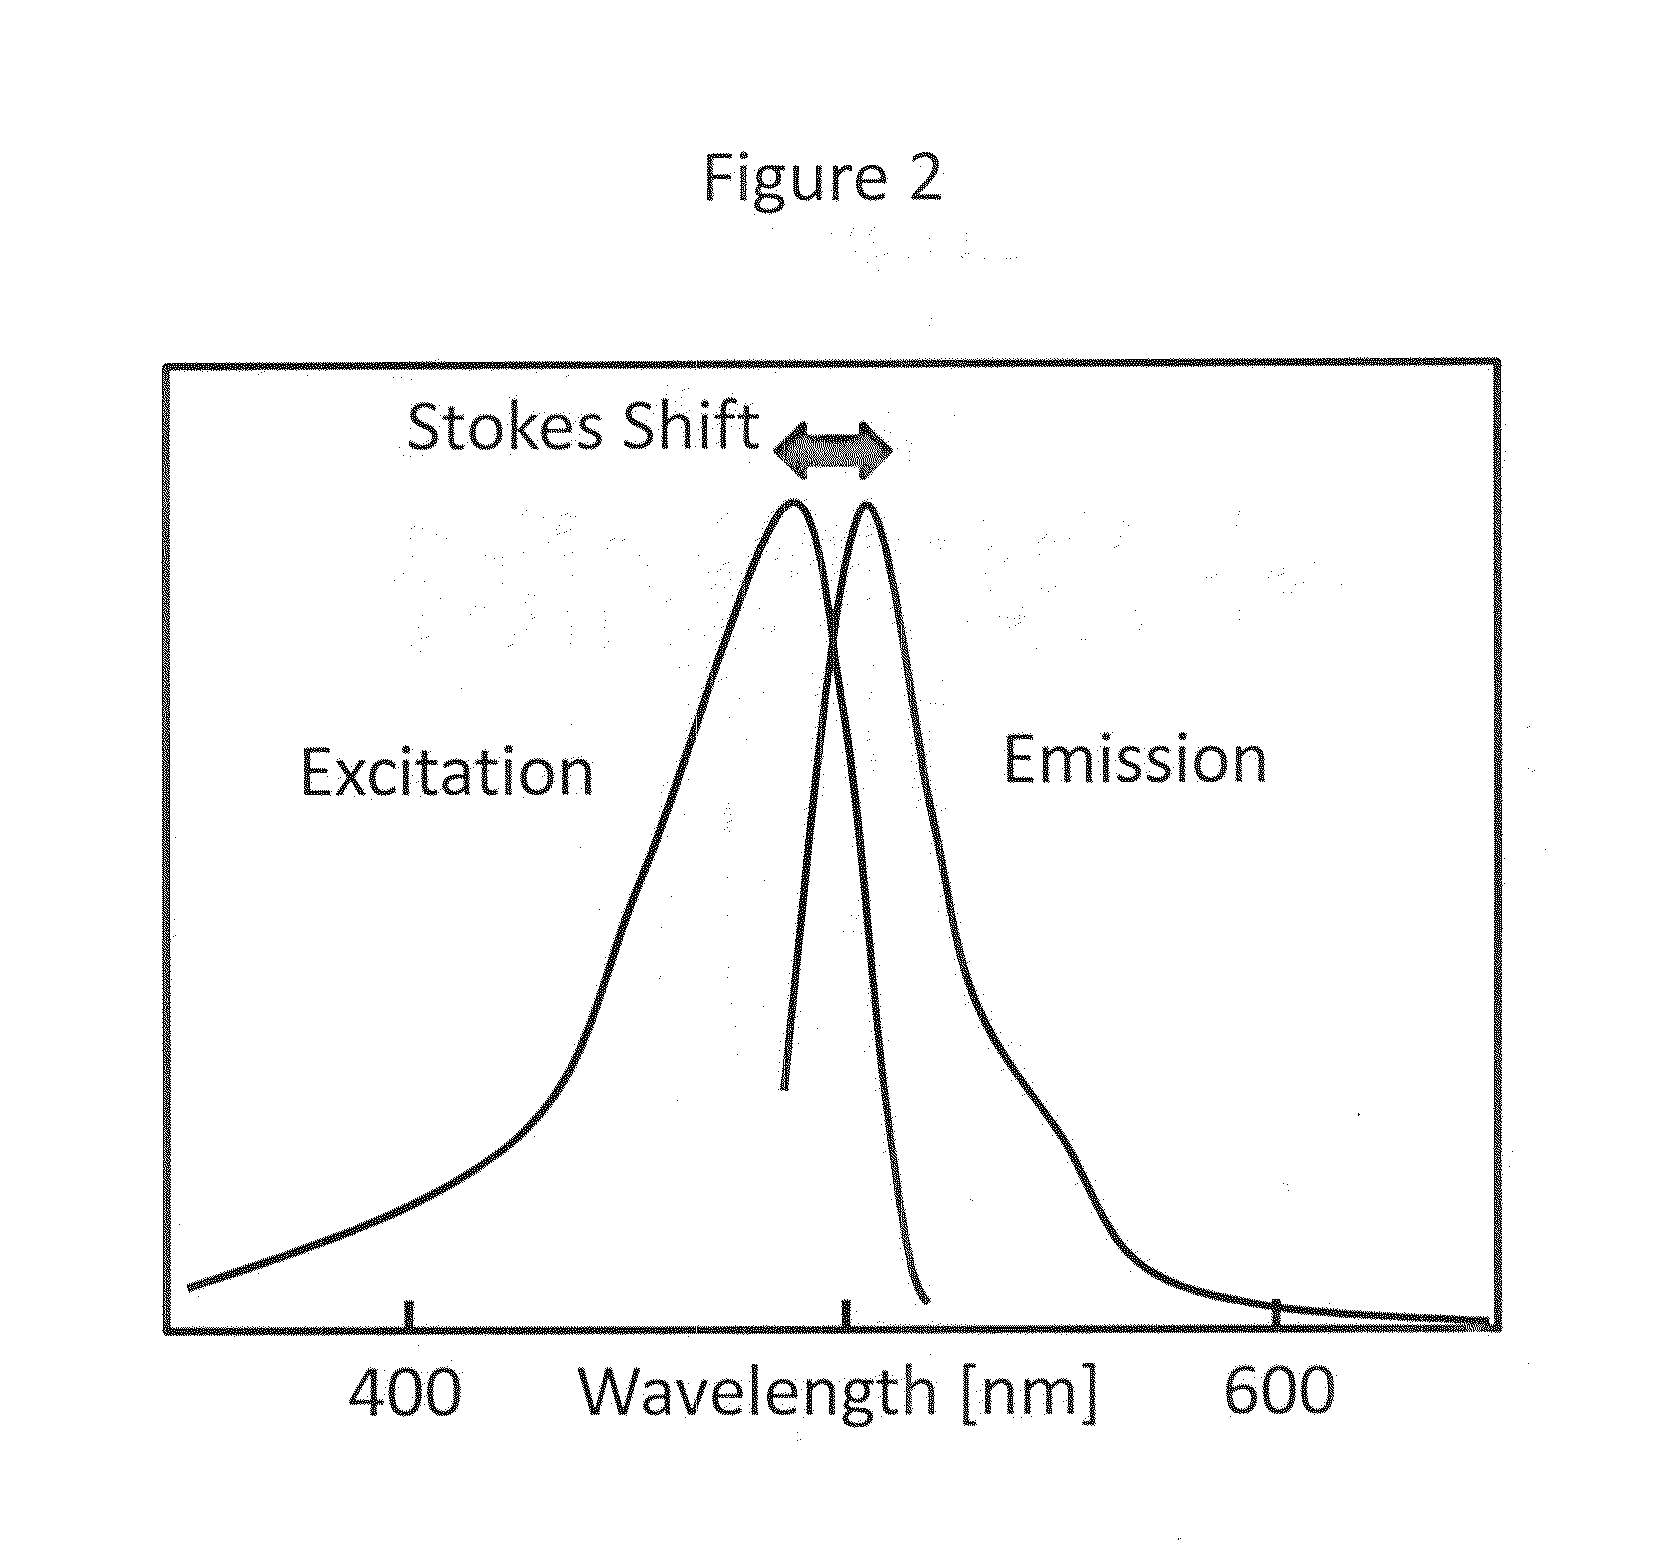 Biophotonic compositions and methods for providing biophotonic treatment